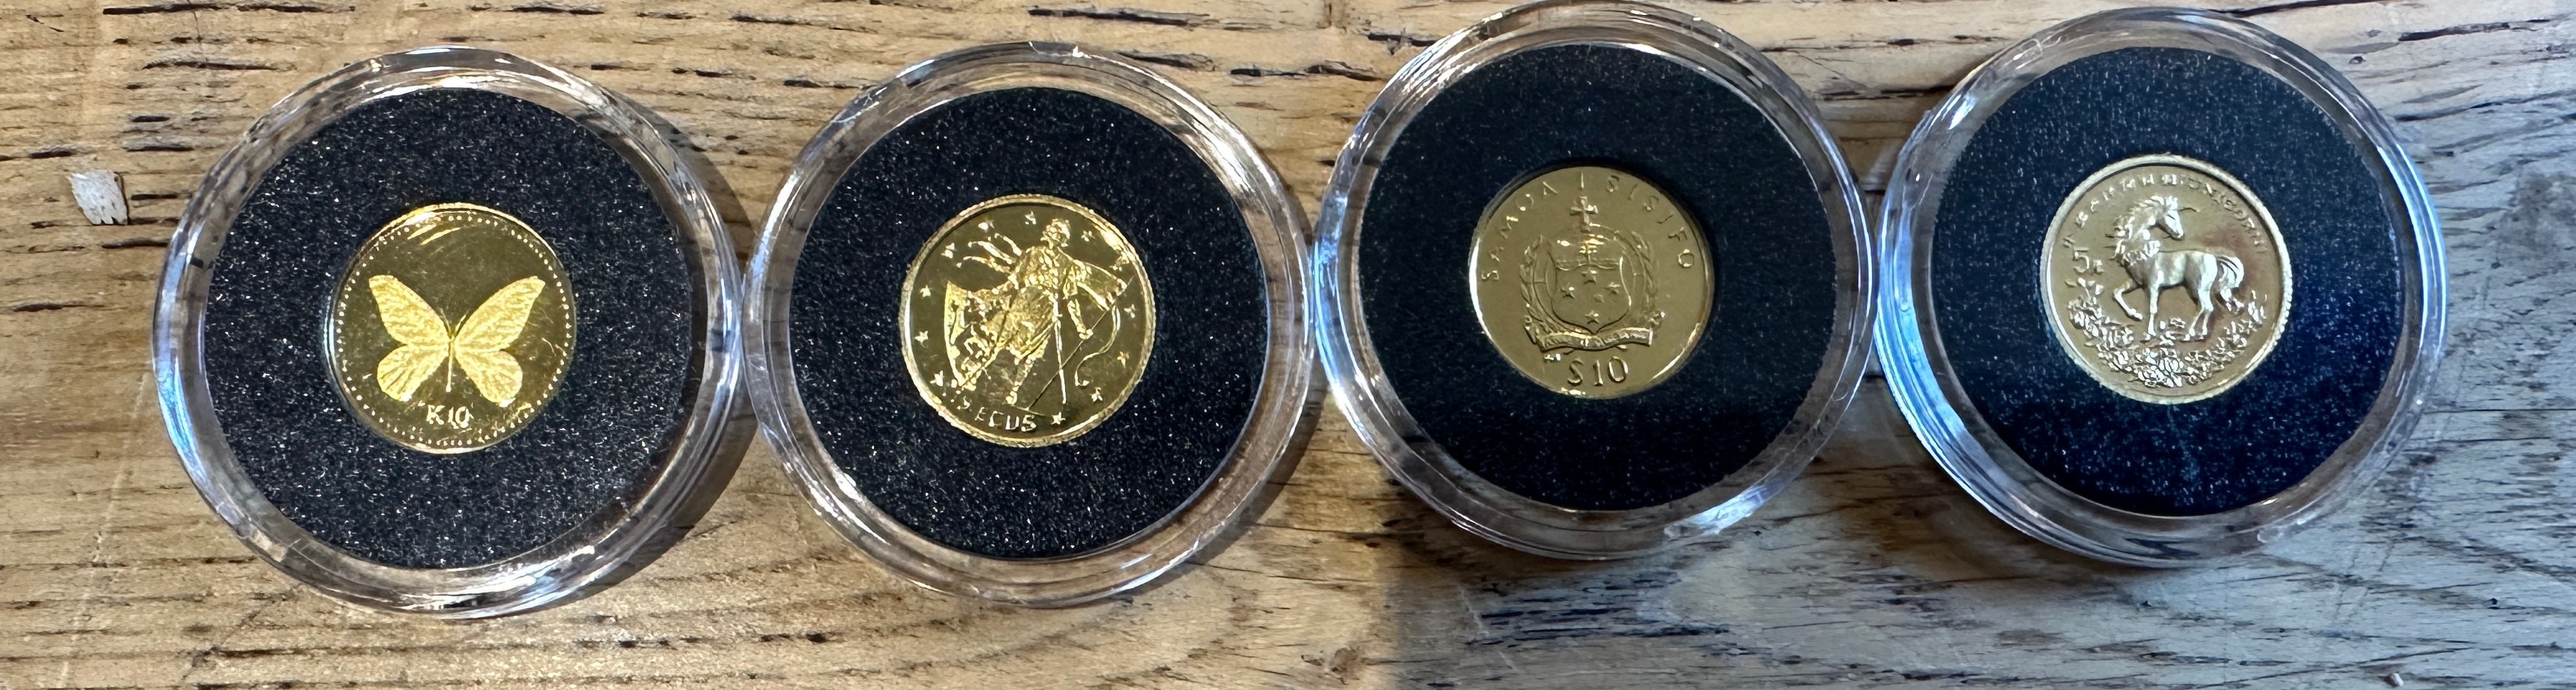 Lot of 4 Miniature Gold Coins - Papua New Guinea-Gibraltar-Samoa-PRC approx weight 5.5grams